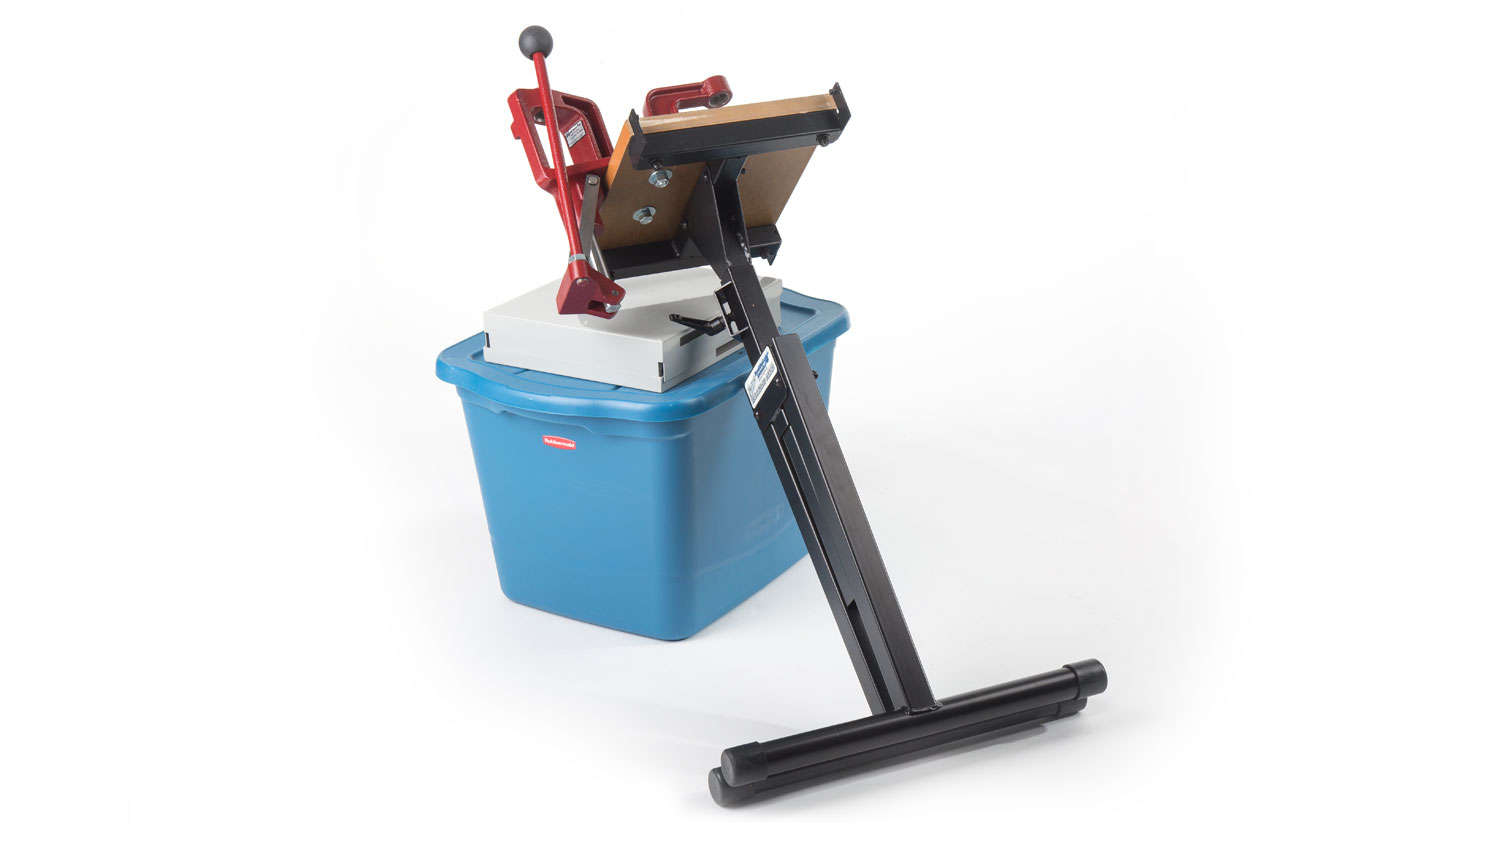 This entire, bench-mounted reloading setup folds easily for storage or transport.